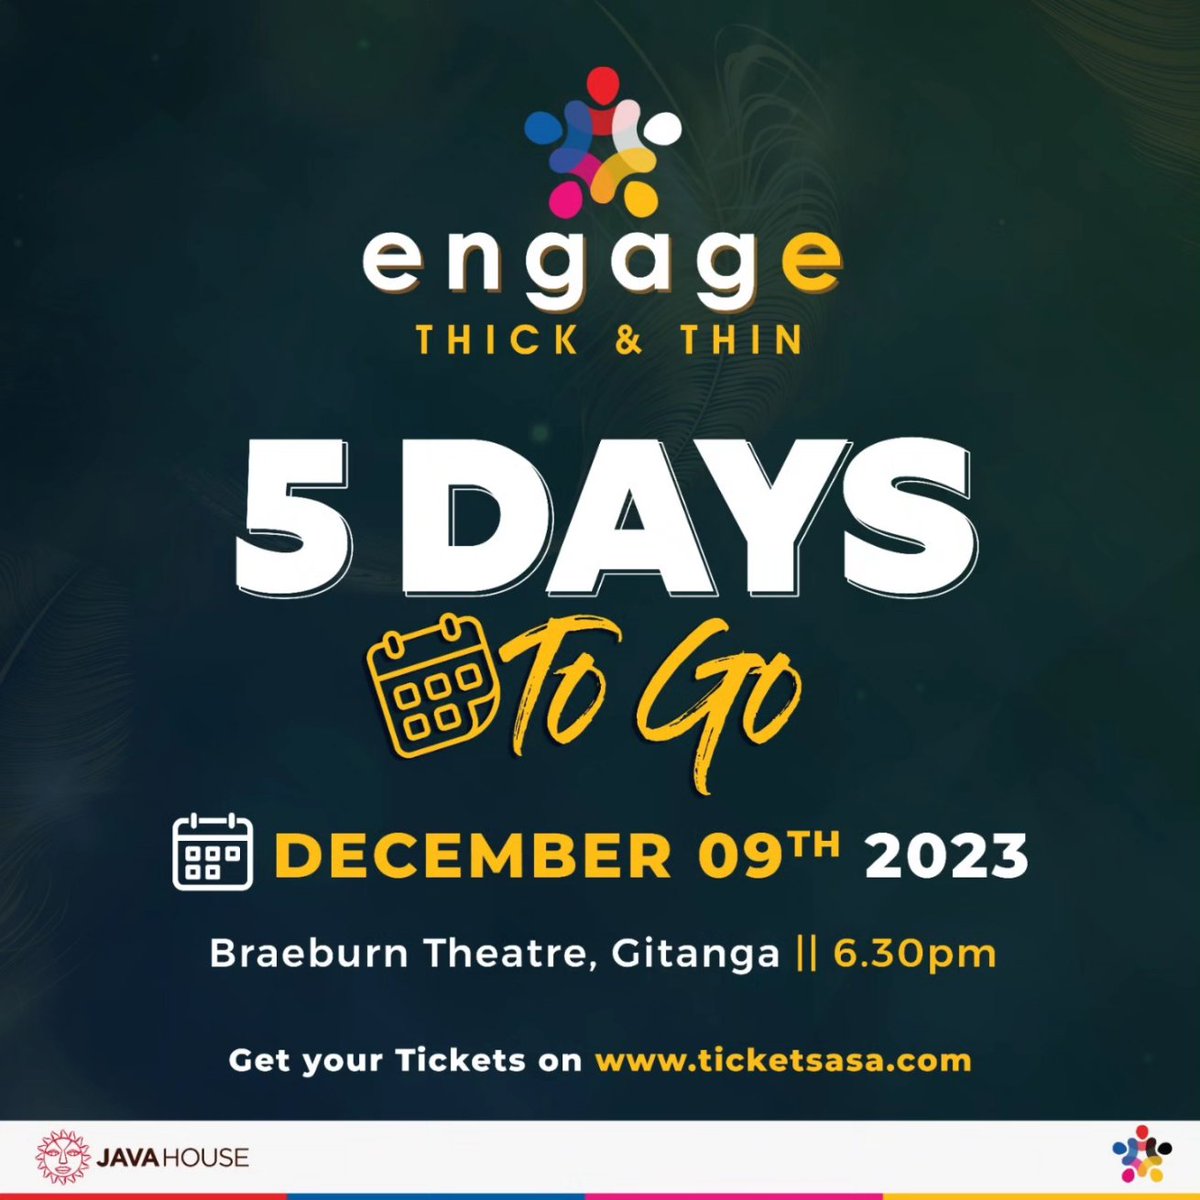 SPECIAL OFFER!
Buy a ticket and get one free. Offer valid on Wednesday from 2:00pm-6:00pm 6th Dec. Head on to bit.ly/EngageTickets to get your ticket. #engage #thick&thin  #TicketsOnSale #ticketoffer #offer